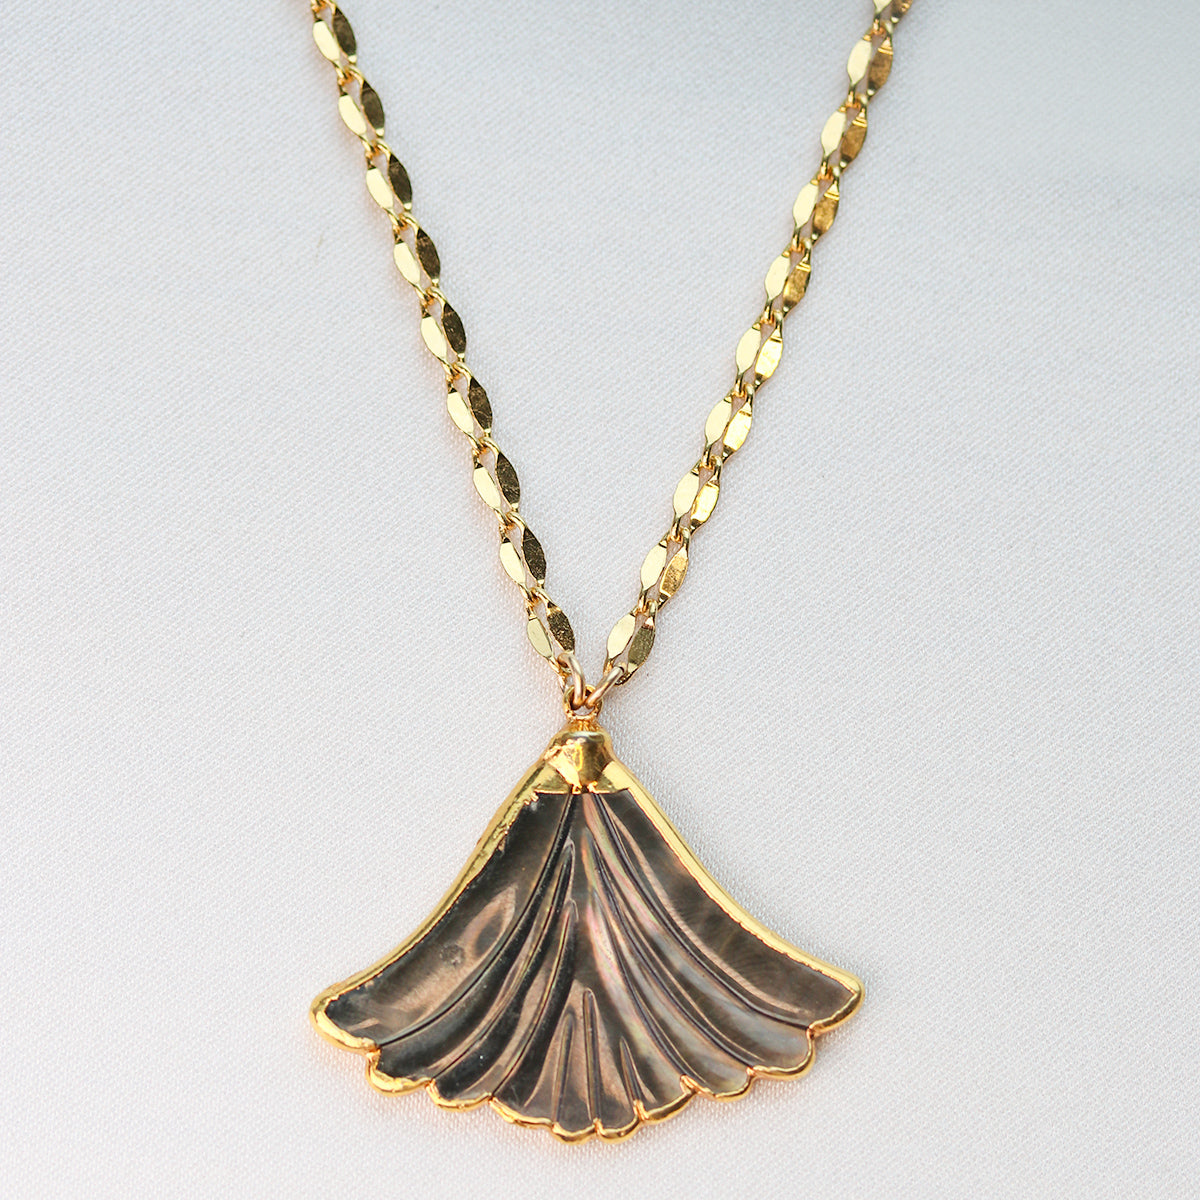 black fan shell necklace large tahitian black mother of pearl 24k gold